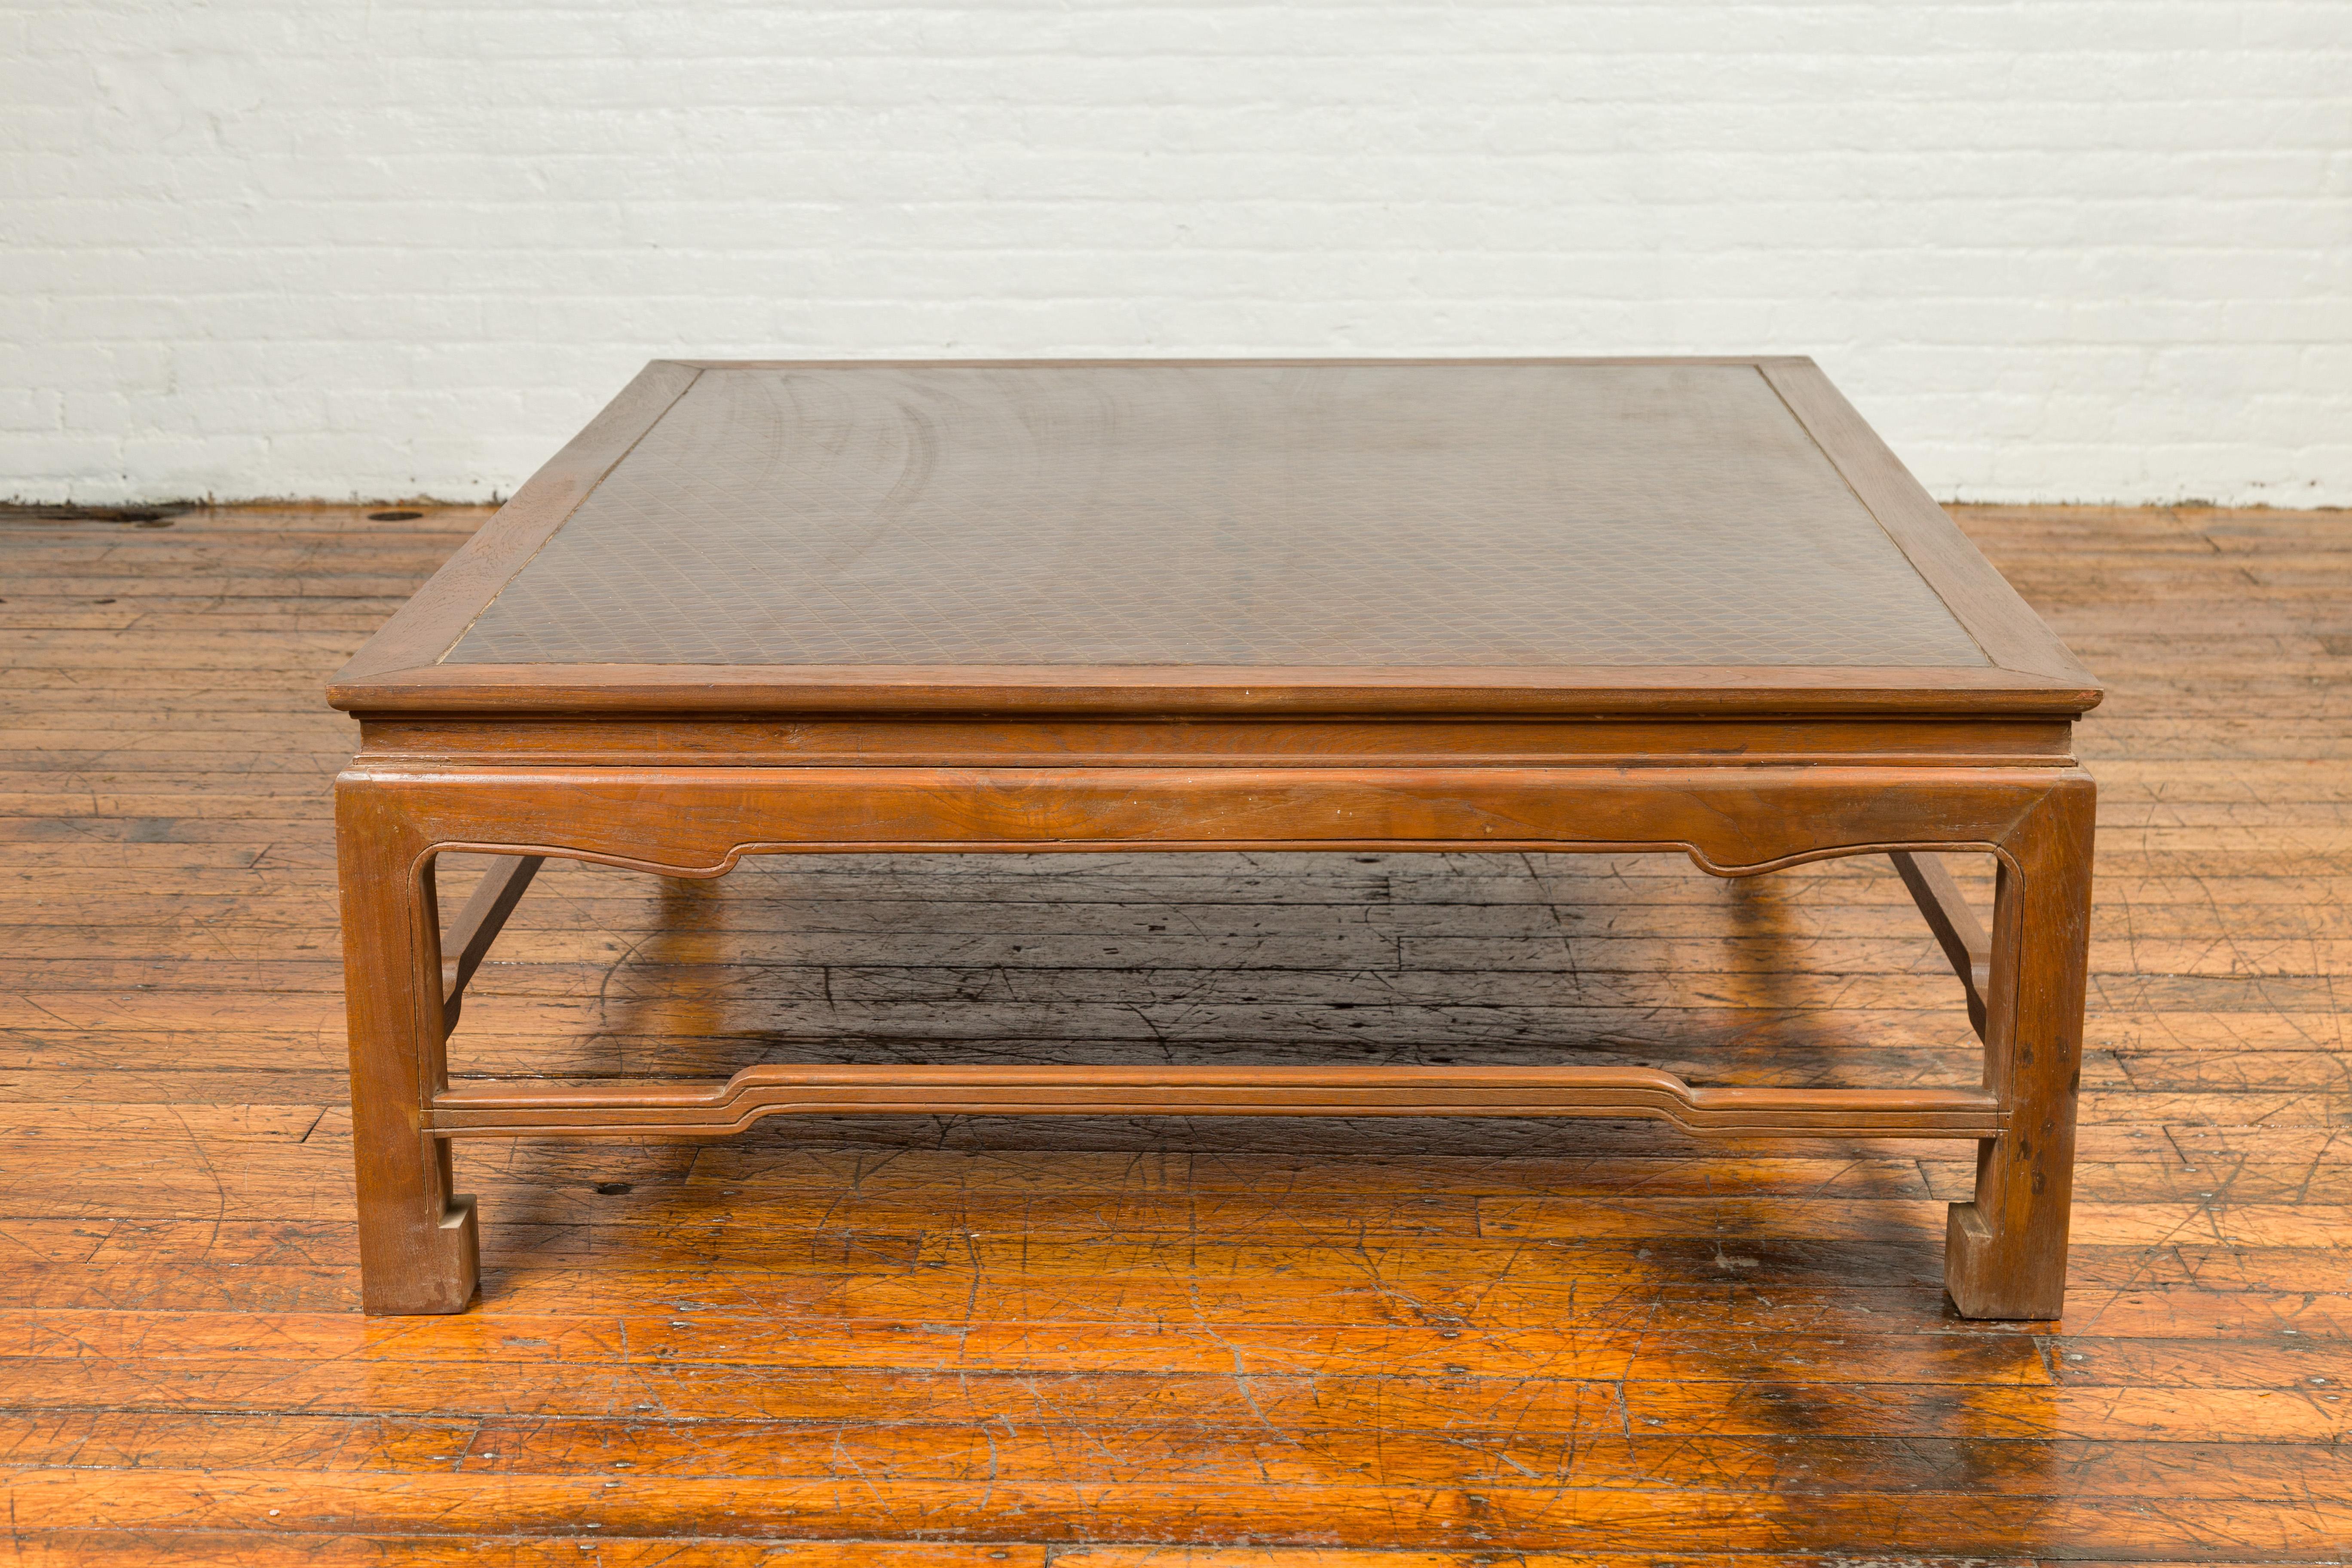 Vintage Burmese Long Coffee Table with Negora Lacquer and Humpback Stretchers 8